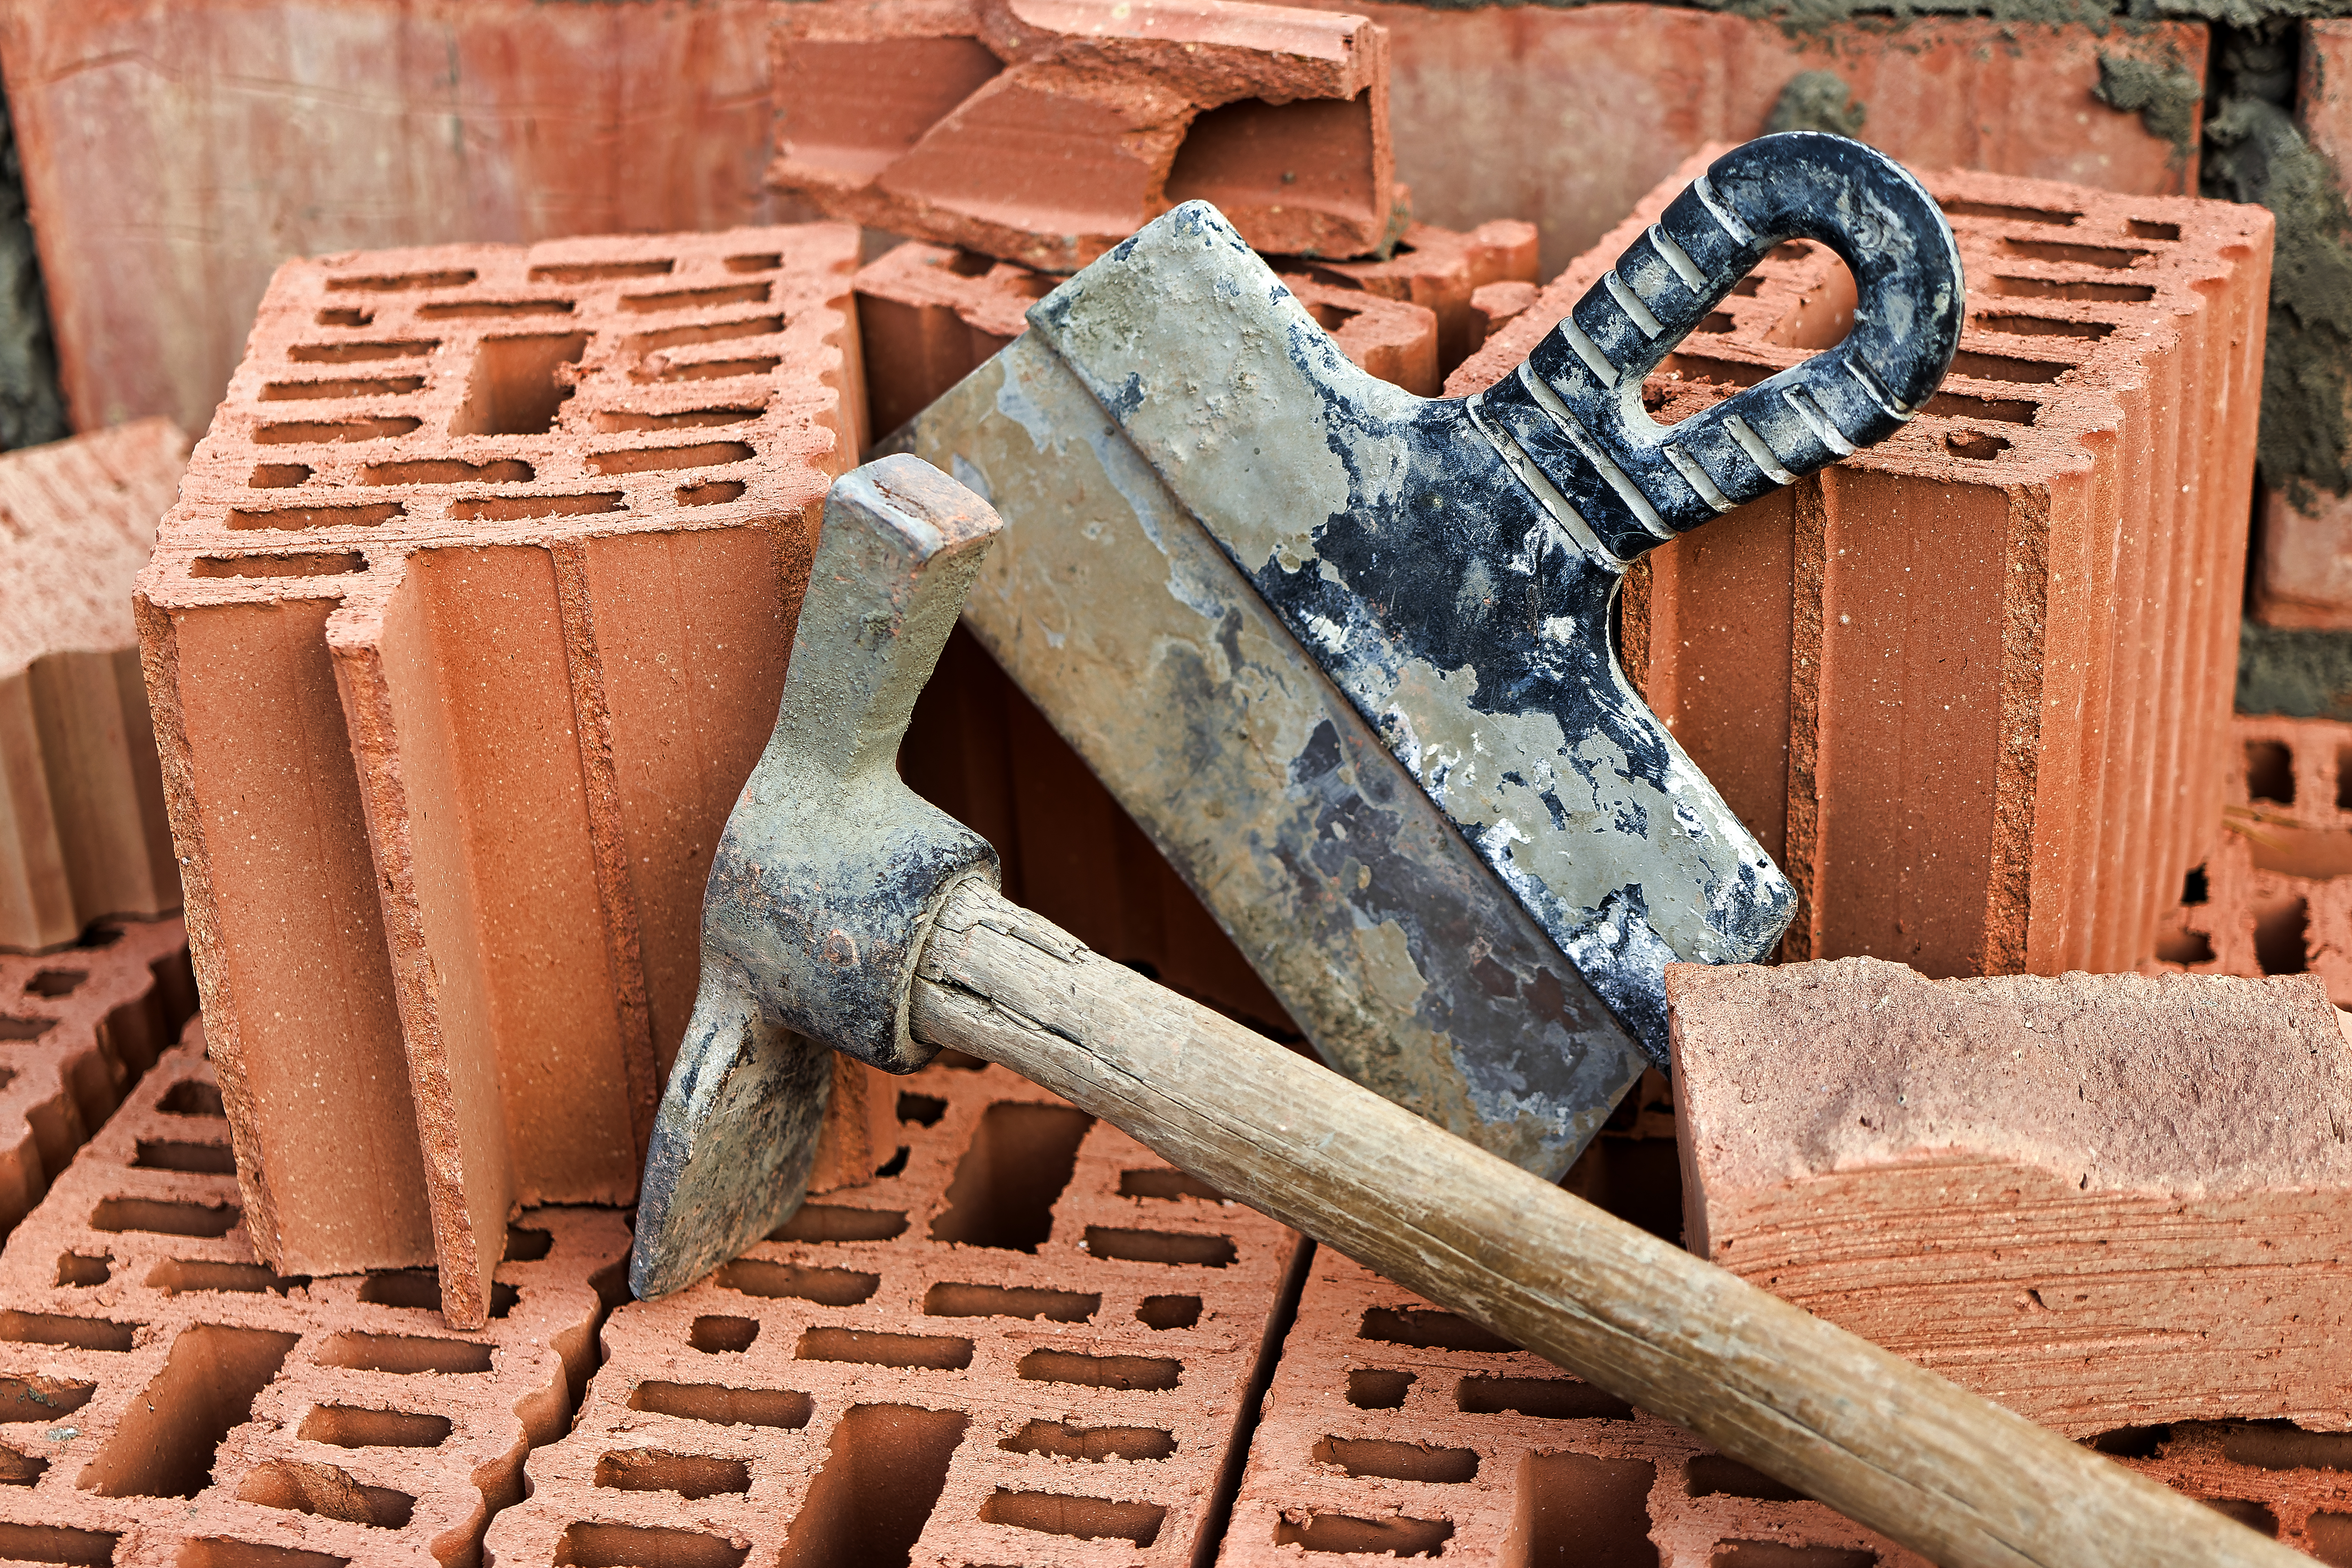 Tools that some of the Best Masons in Ottawa use. This image shows a pile of red bricks with a trowel and masons’ hammer staged for the photo, against a top row of bricks.